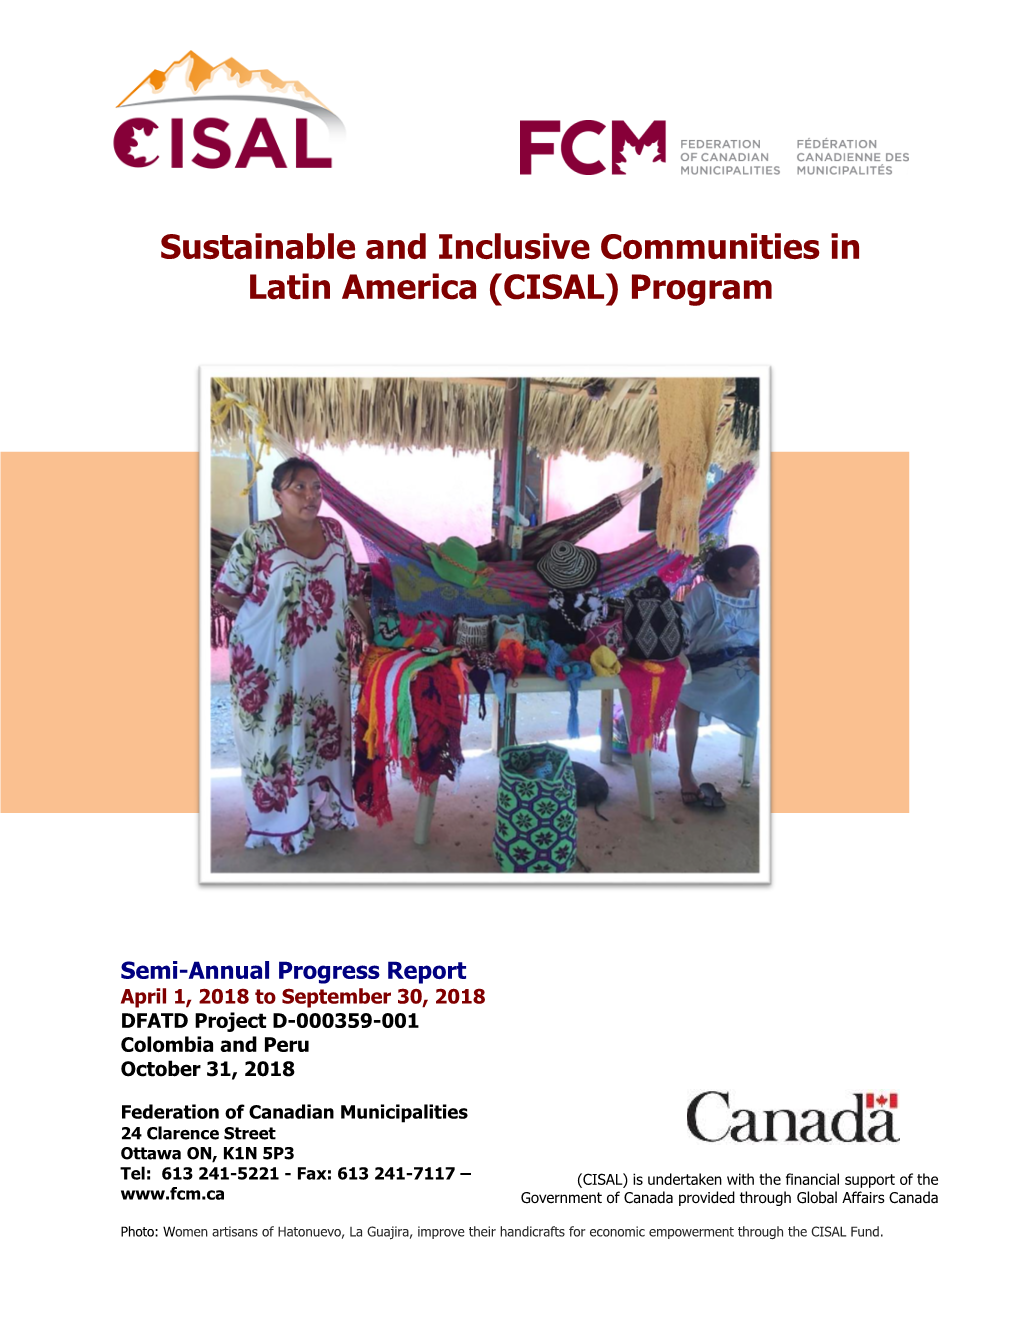 Sustainable and Inclusive Communities in Latin America (CISAL) Program